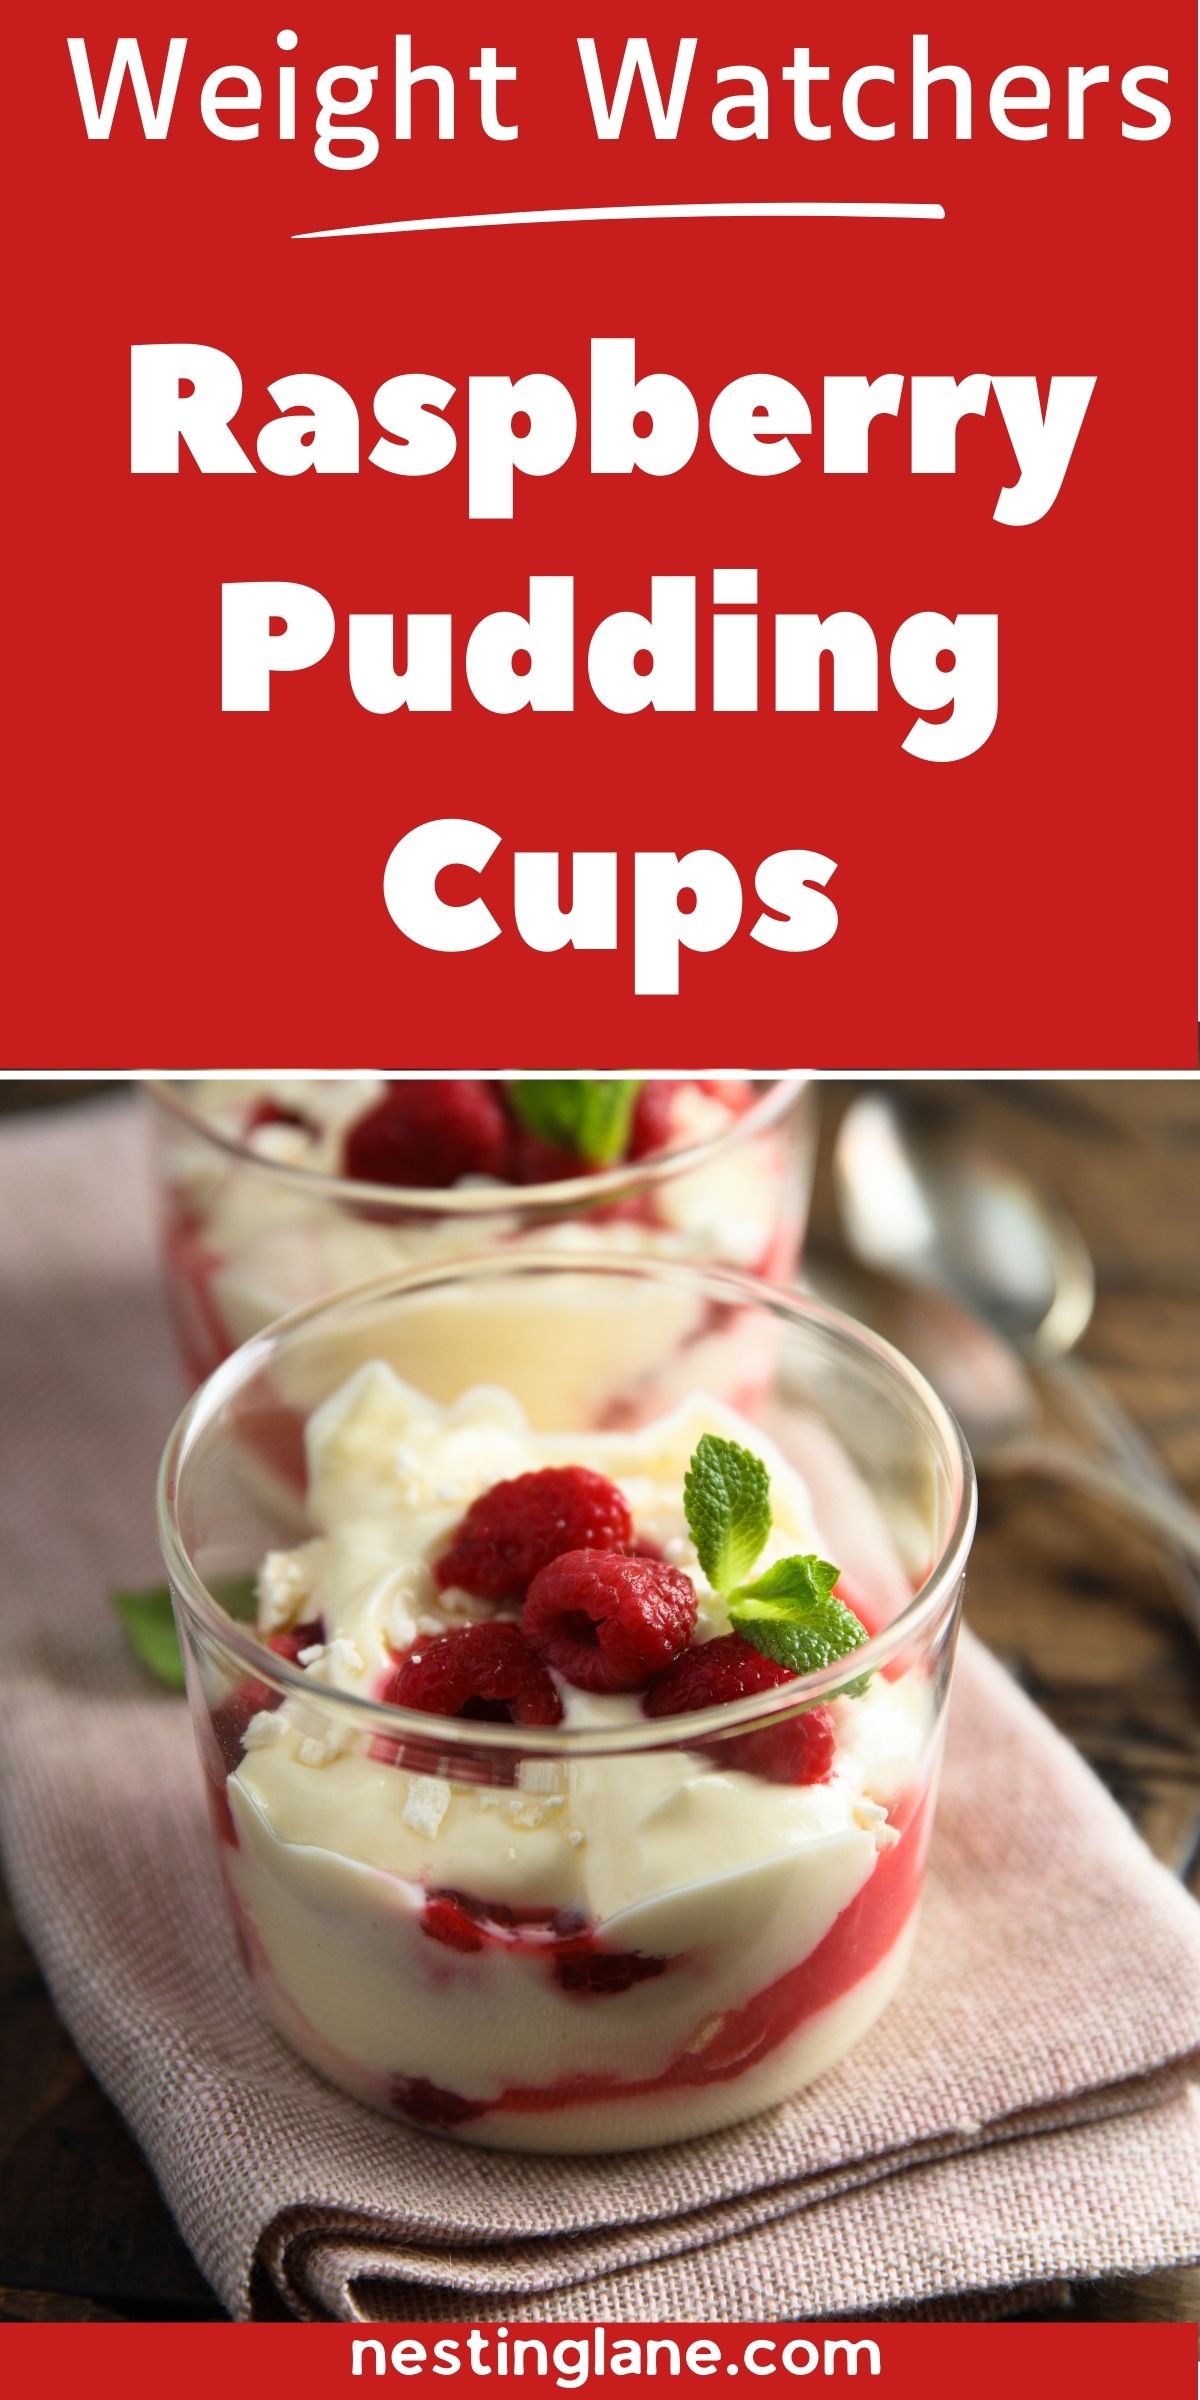 Raspberry Pudding Cups graphic.